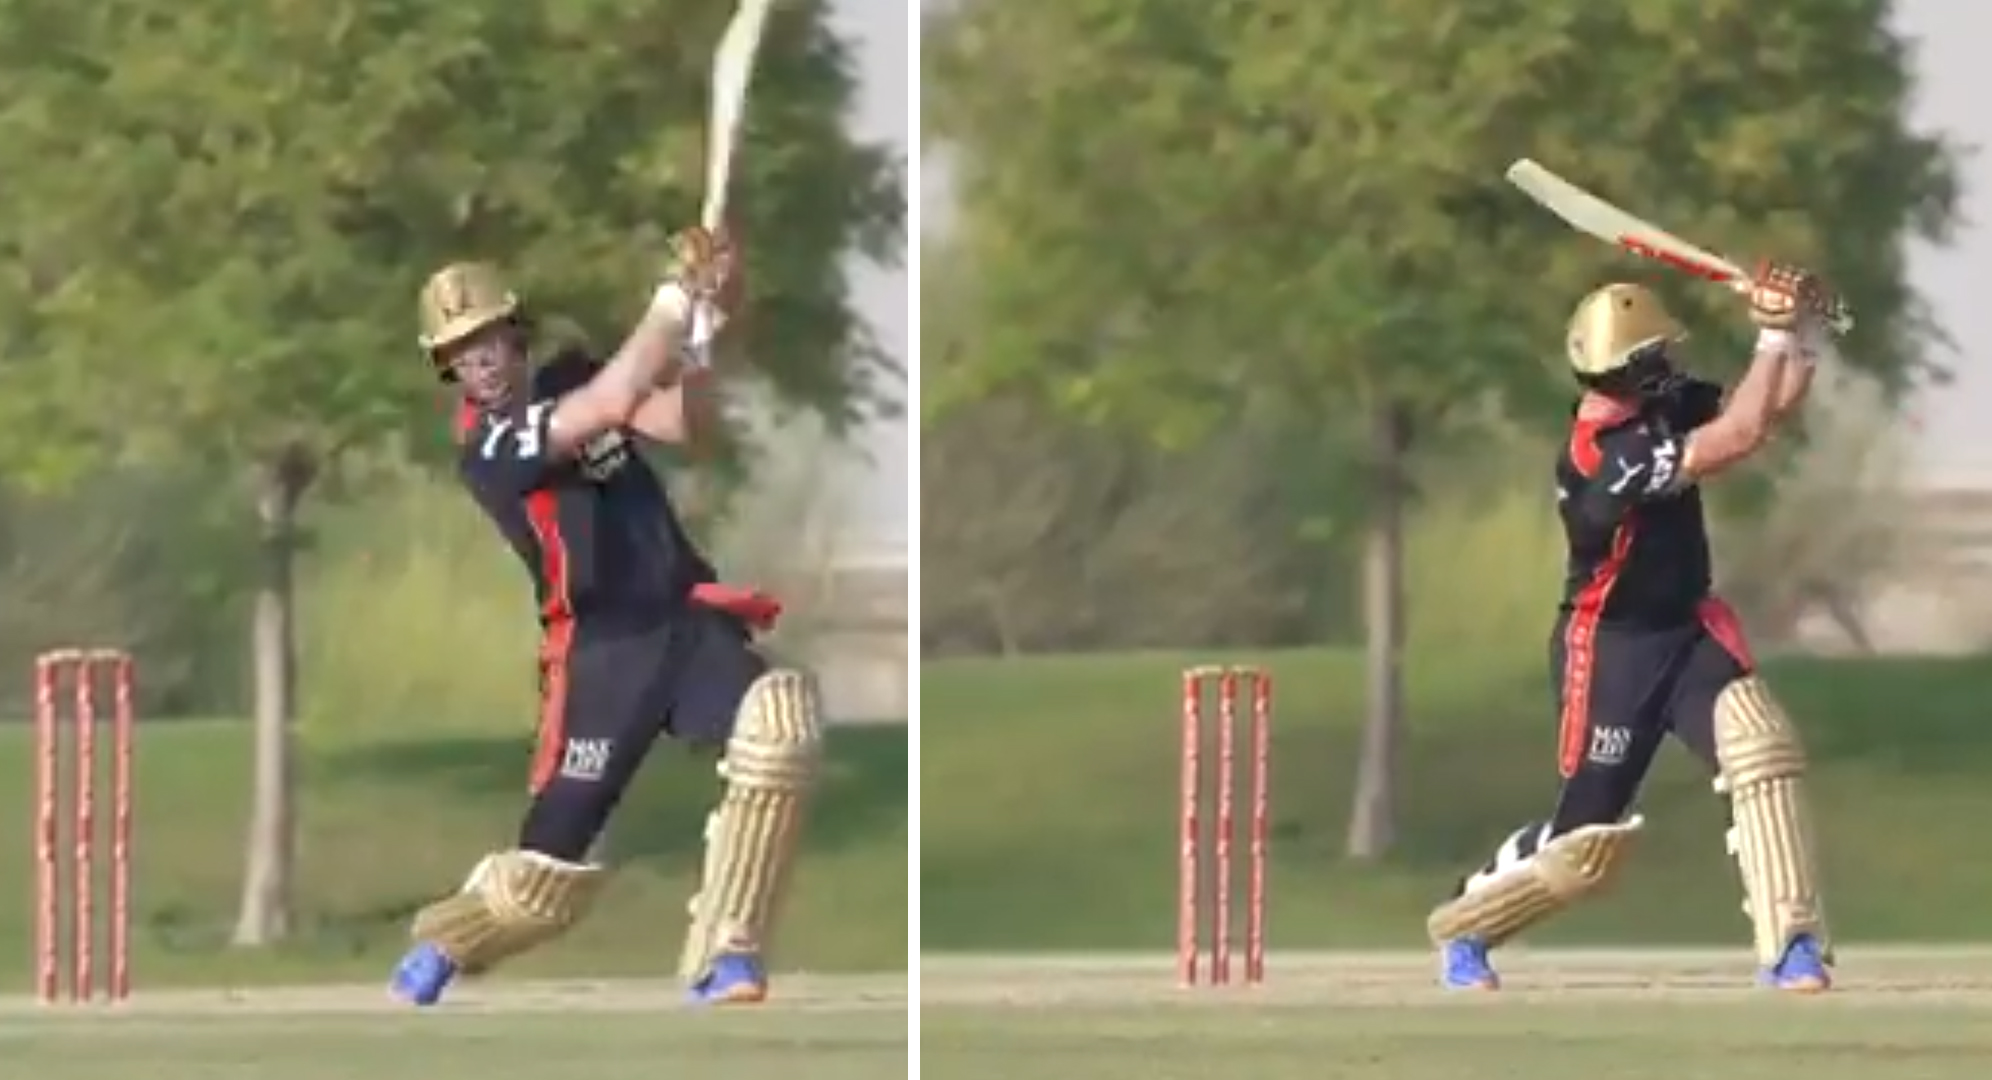 Watch: AB De Villiers Slams A Hundred In Royal Challengers Bangalore’s Intra-Squad Match